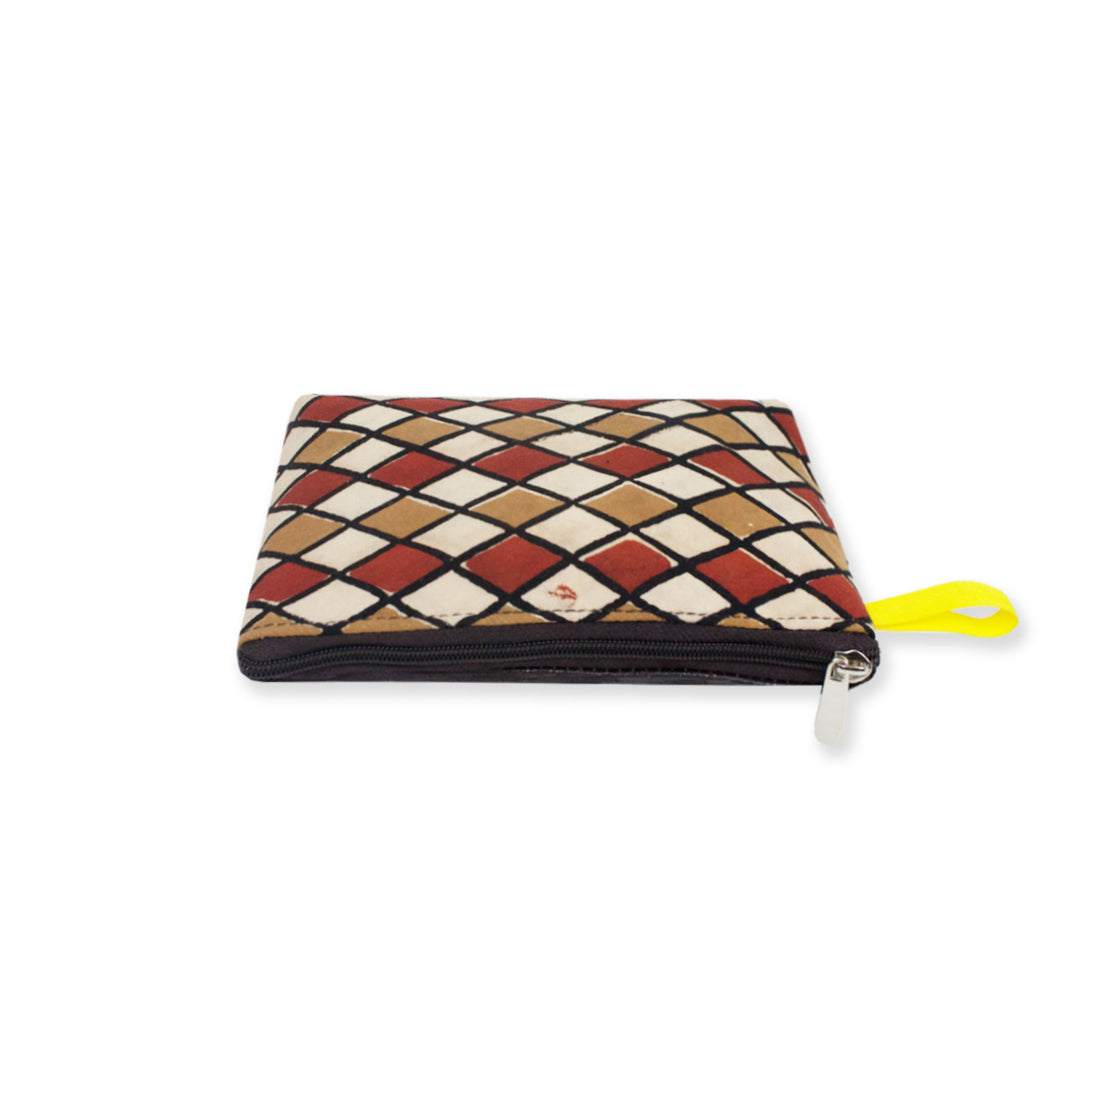 The Kites Block Printed Pouch